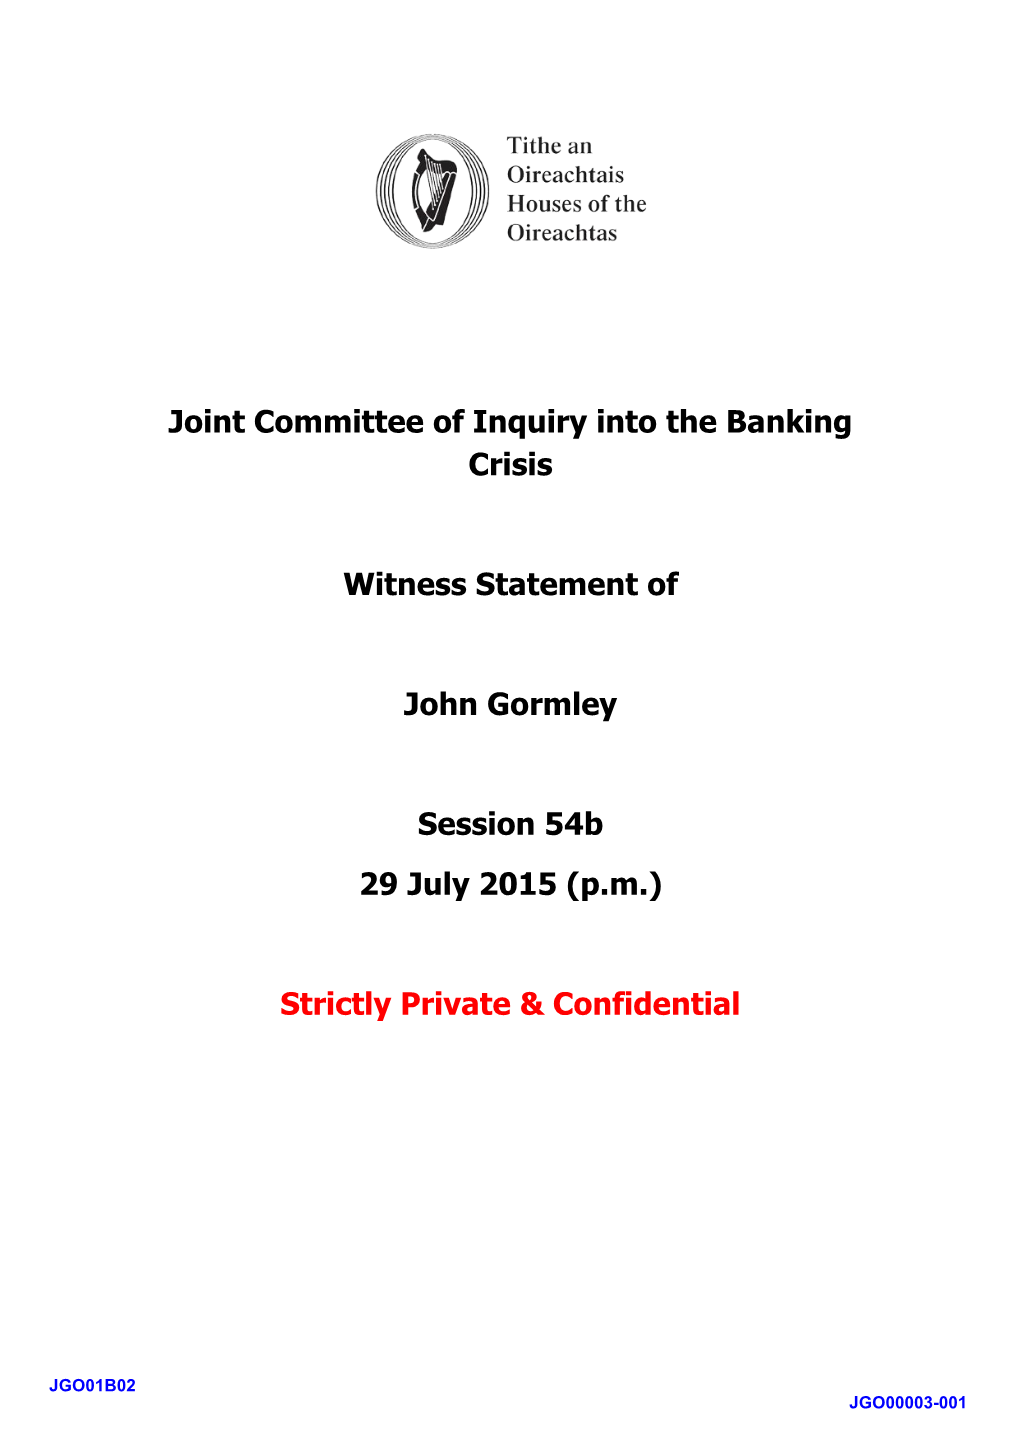 Joint Committee of Inquiry Into the Banking Crisis